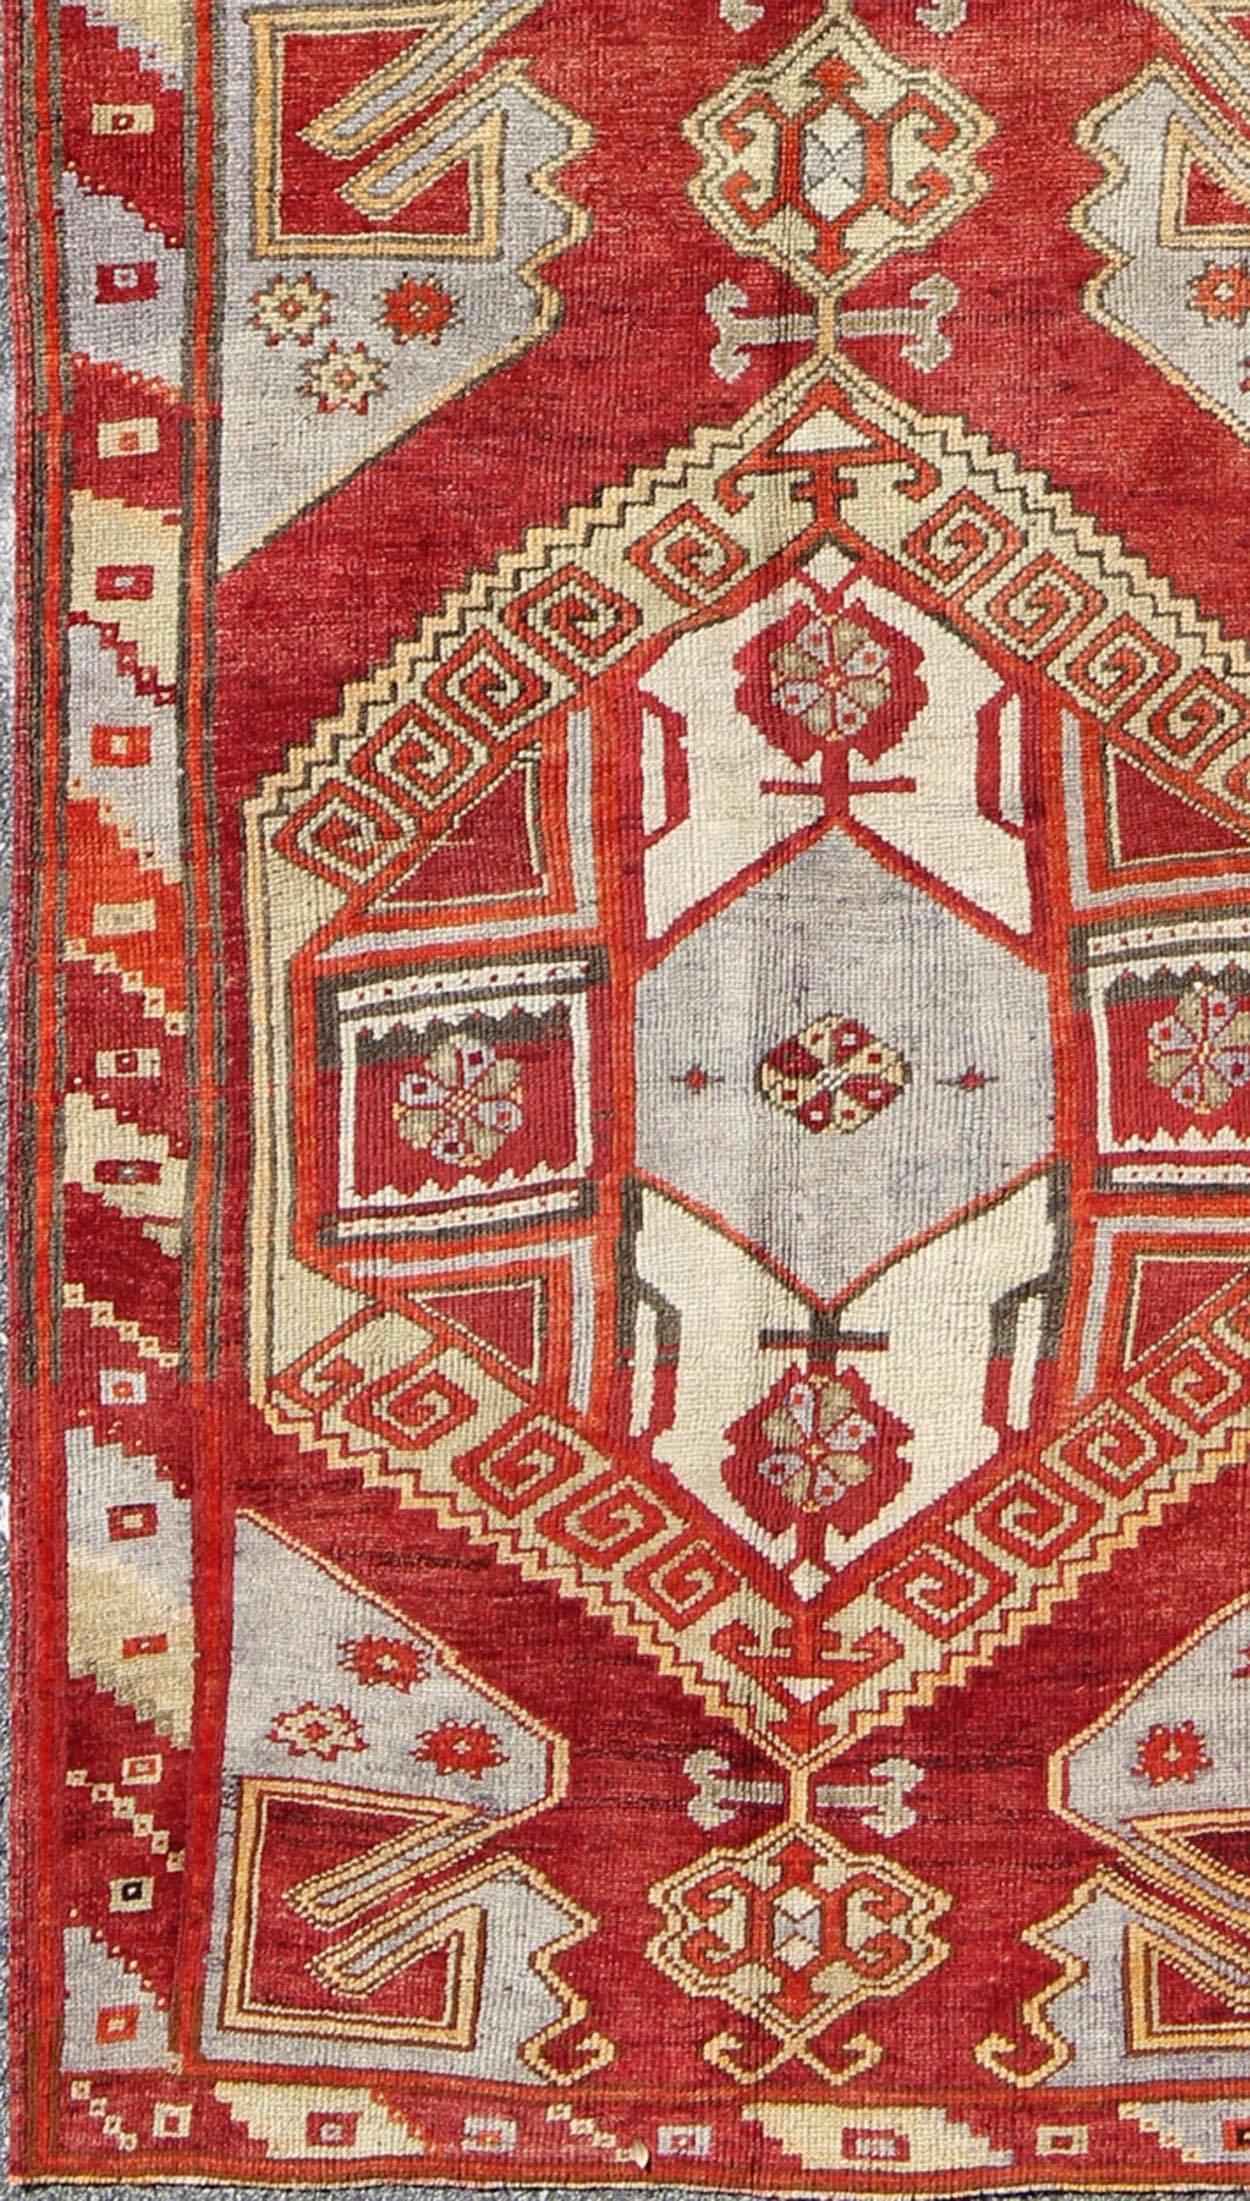 This vintage Turkish Oushak carpet (circa mid-20th century) features a central dual-medallion design, as well as patterns of geometric elements in the four cornices, and in the surrounding borders. The rug's qualities are enhanced by its